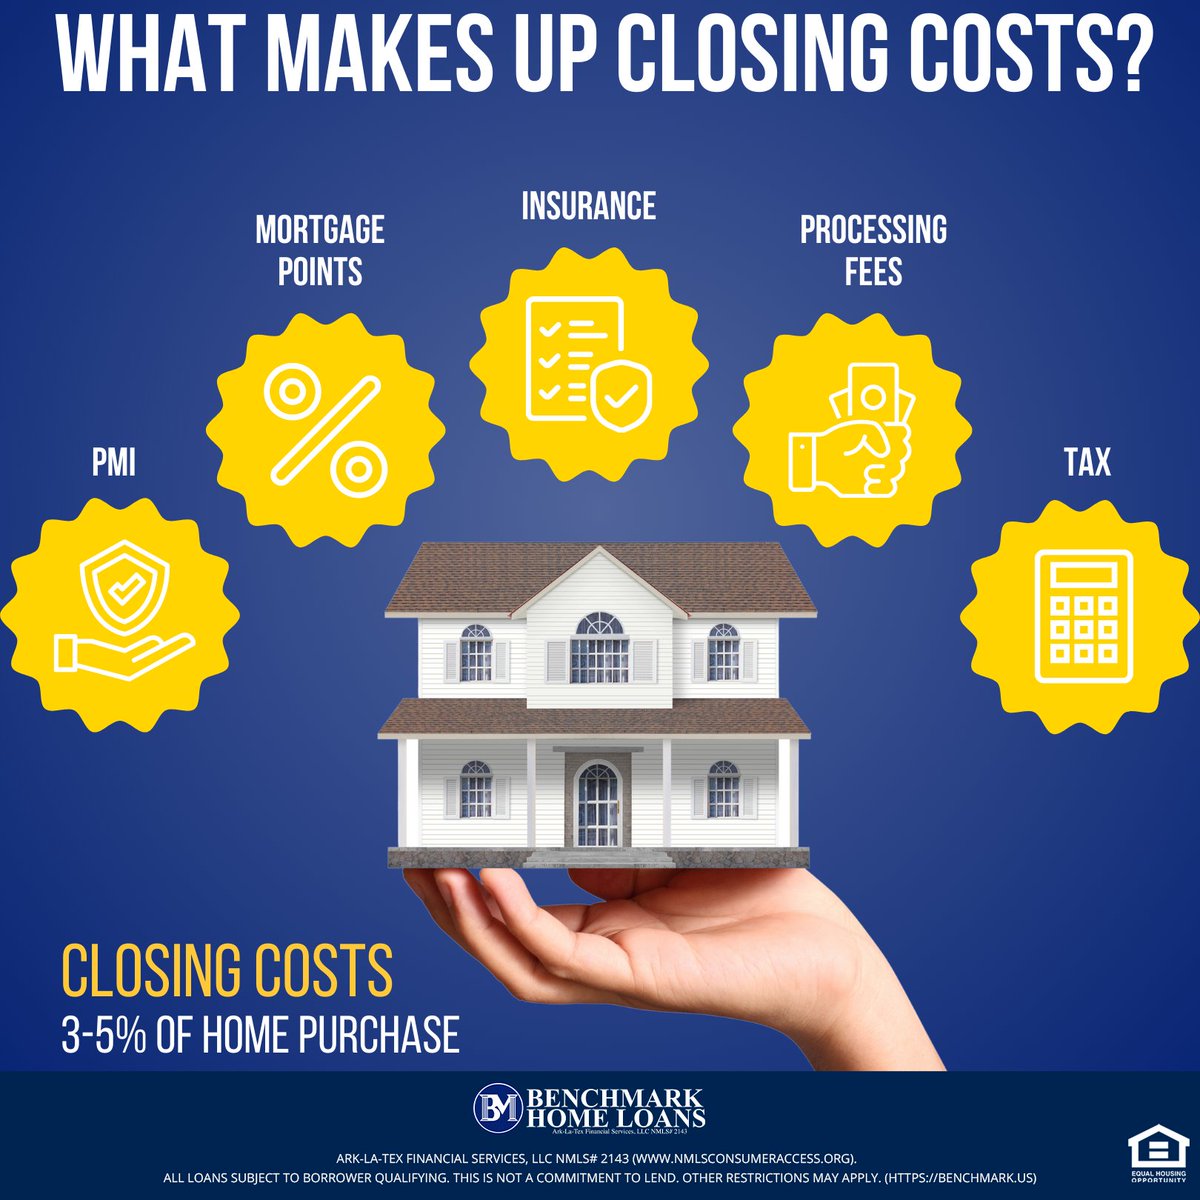 Let's talk closing costs! 🏡💰
Understanding the breakdown of closing costs can empower you as a homebuyer, ensuring you're fully prepared for this important step in your journey to homeownership. 🏡
#closingcosts #firsttimehomebuyer #realestate #homebuyingtips